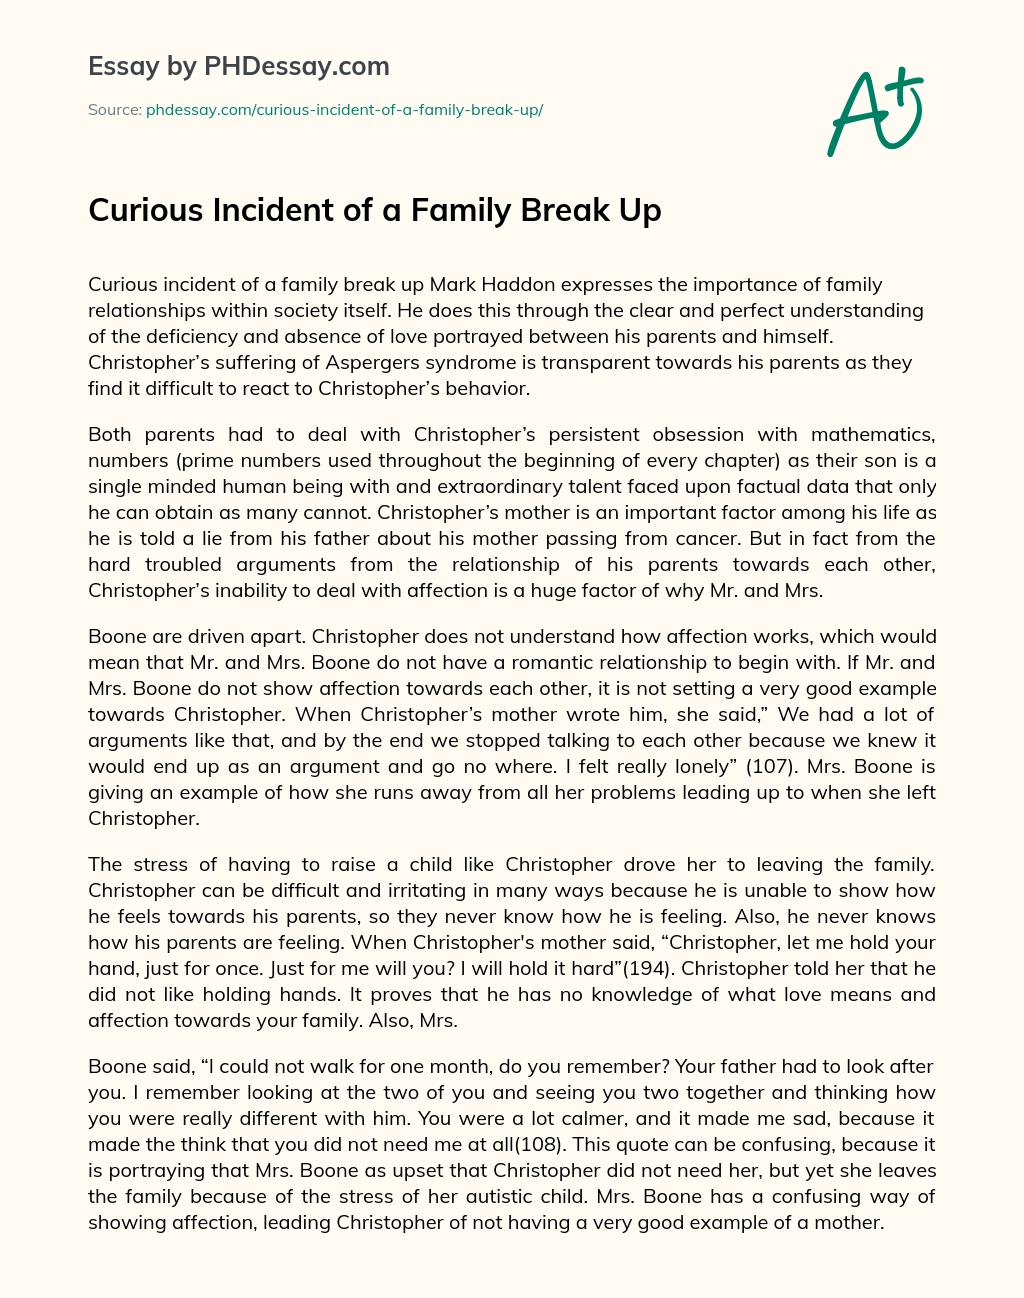 Curious Incident of a Family Break Up essay